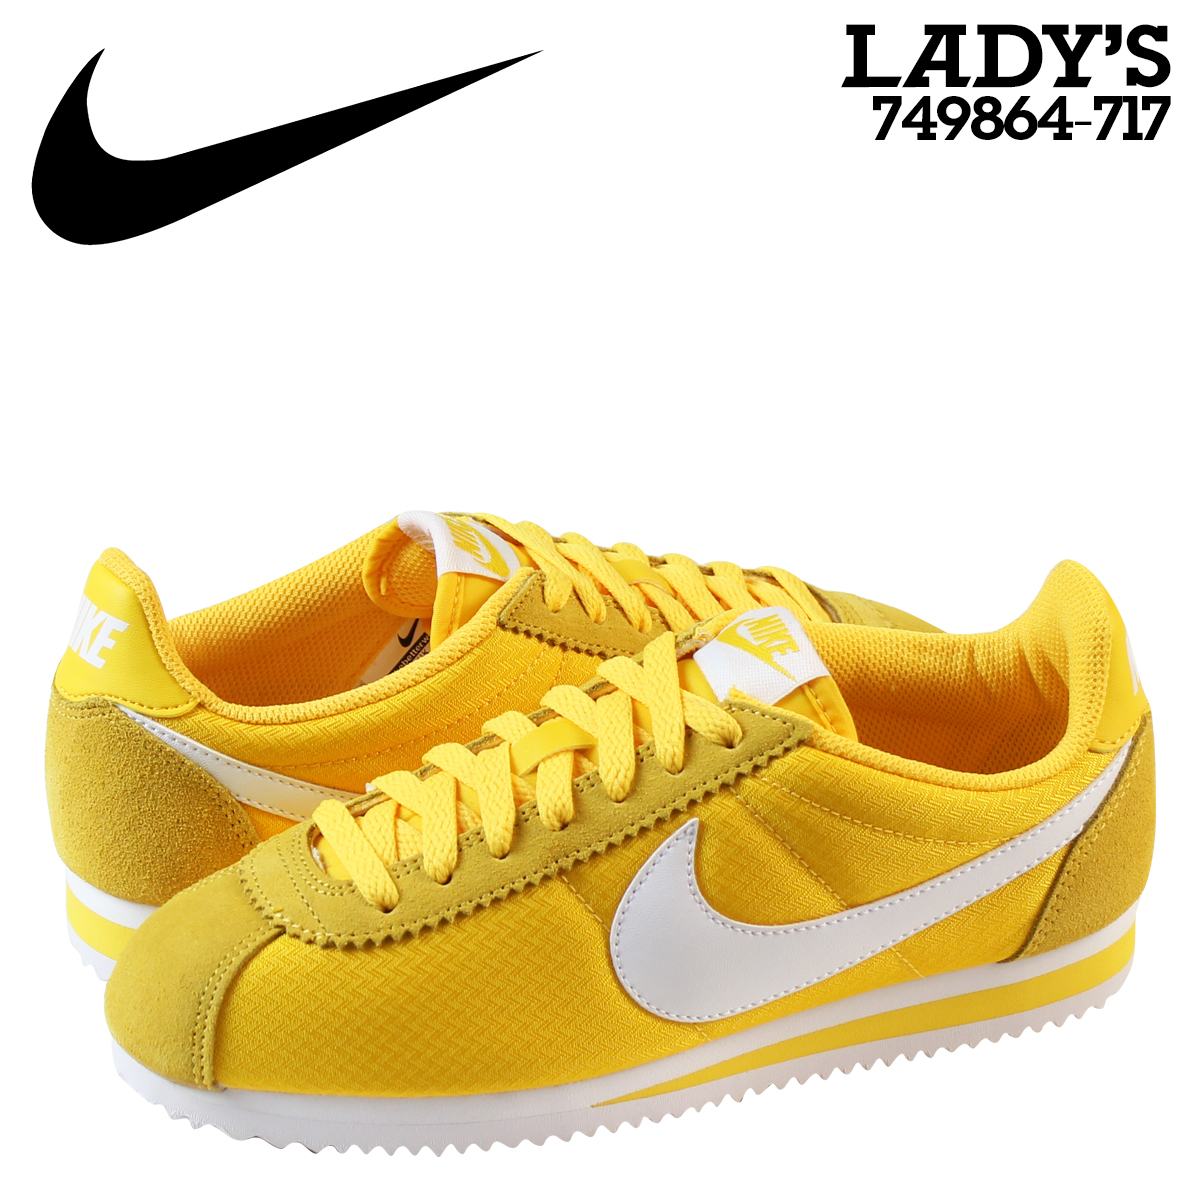 nike shoes yellow color